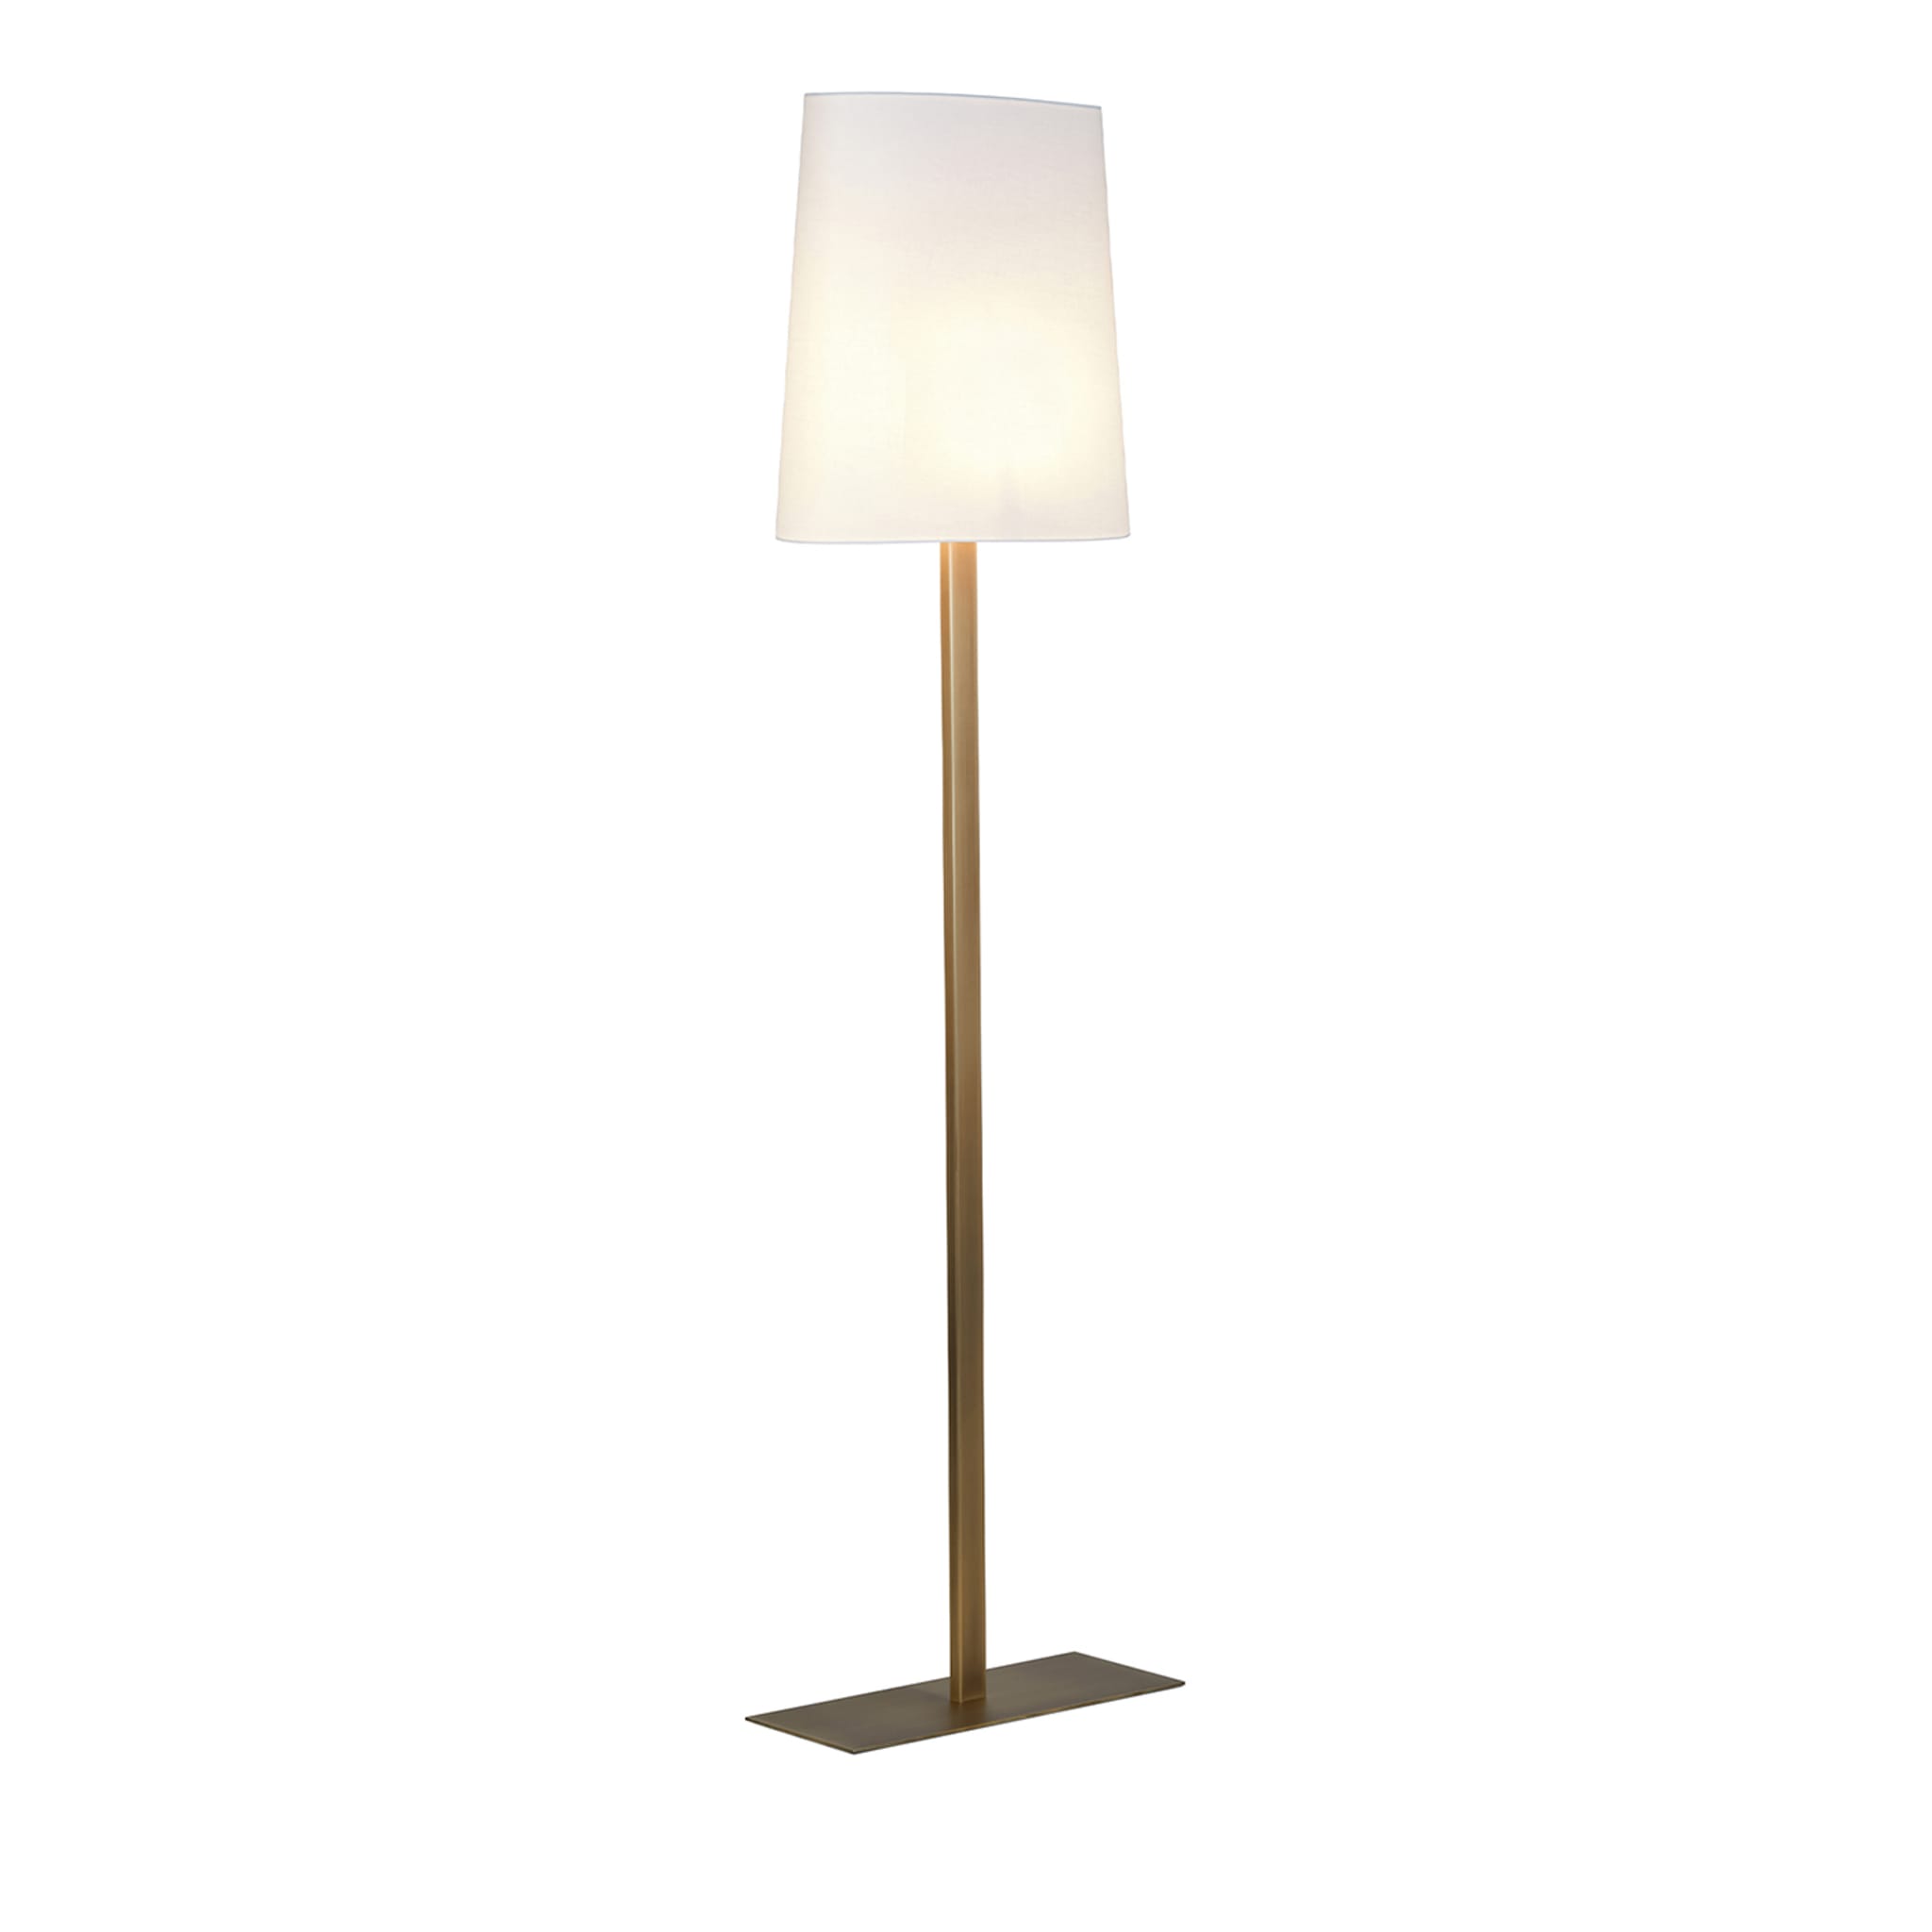 Ovale Brushed Bronzed Floor Lamp with White Cotton Shade - Main view